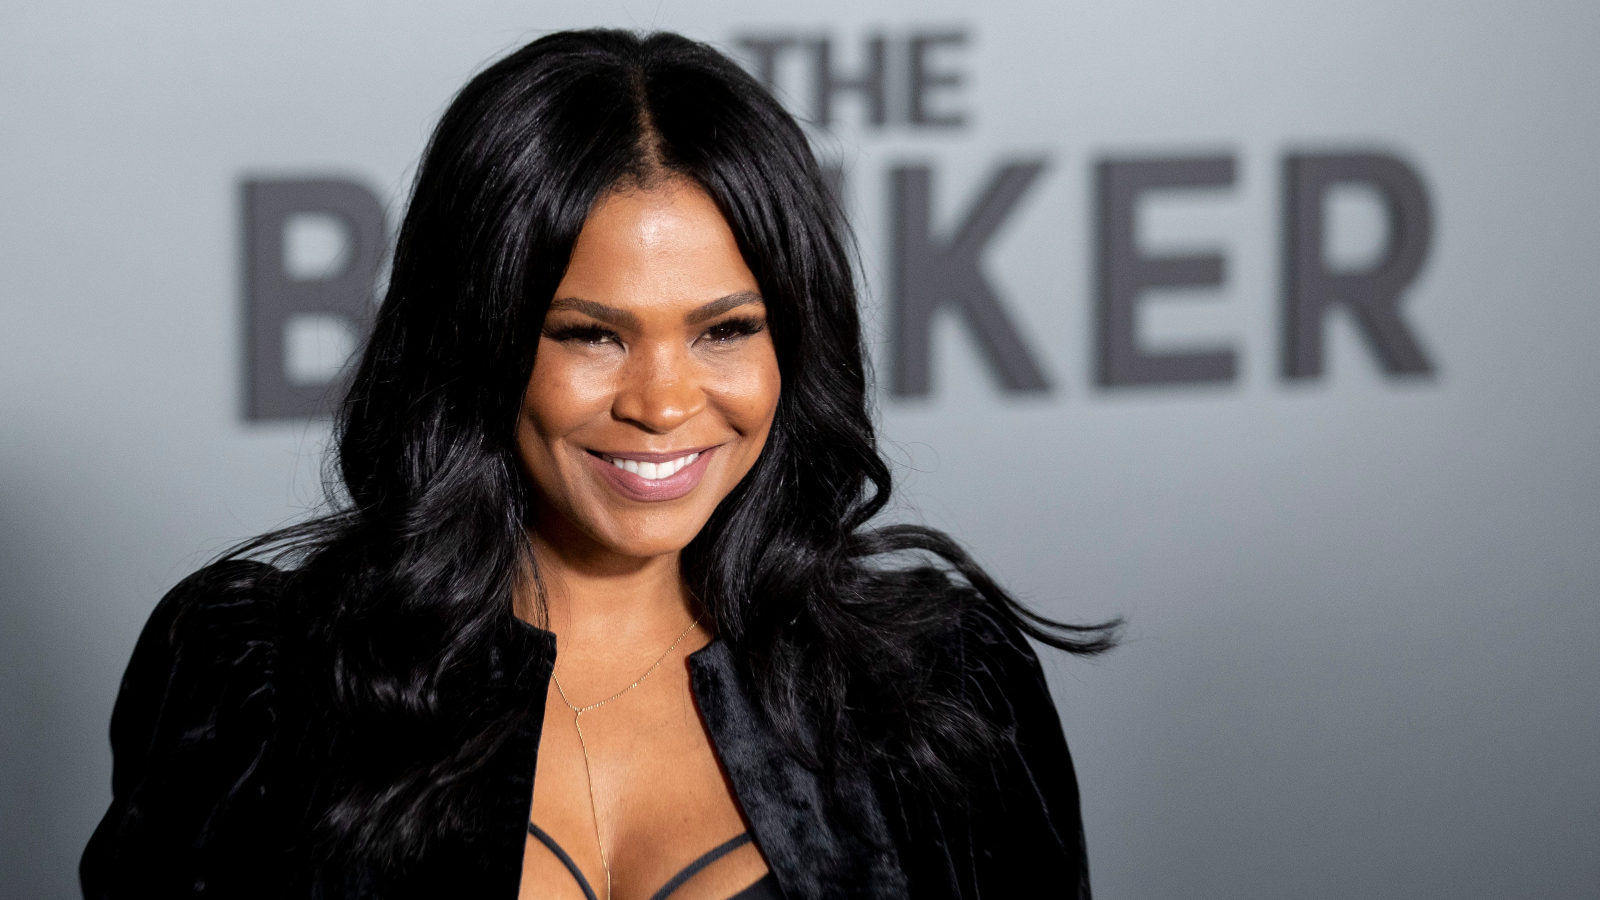 Nia Long Releases Statement After Celtics Coach Ime Udoka’s Suspension - Sports Illustrated